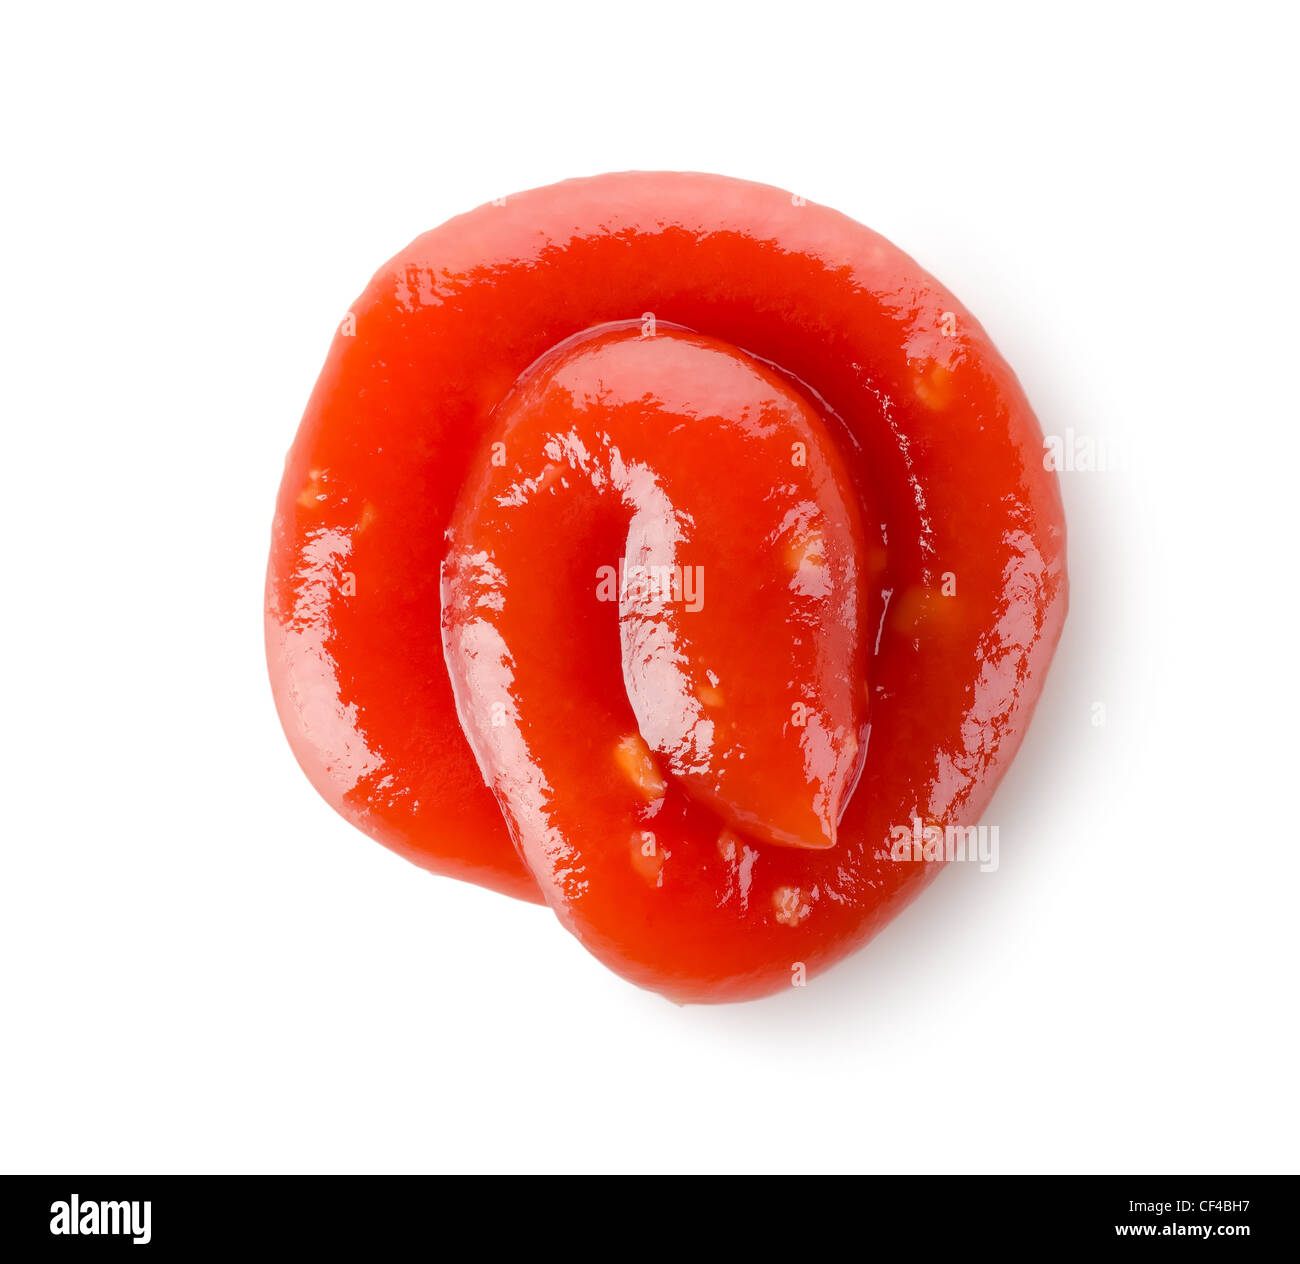 Tomato ketchup sauce isolated on a white background. Stock Photo